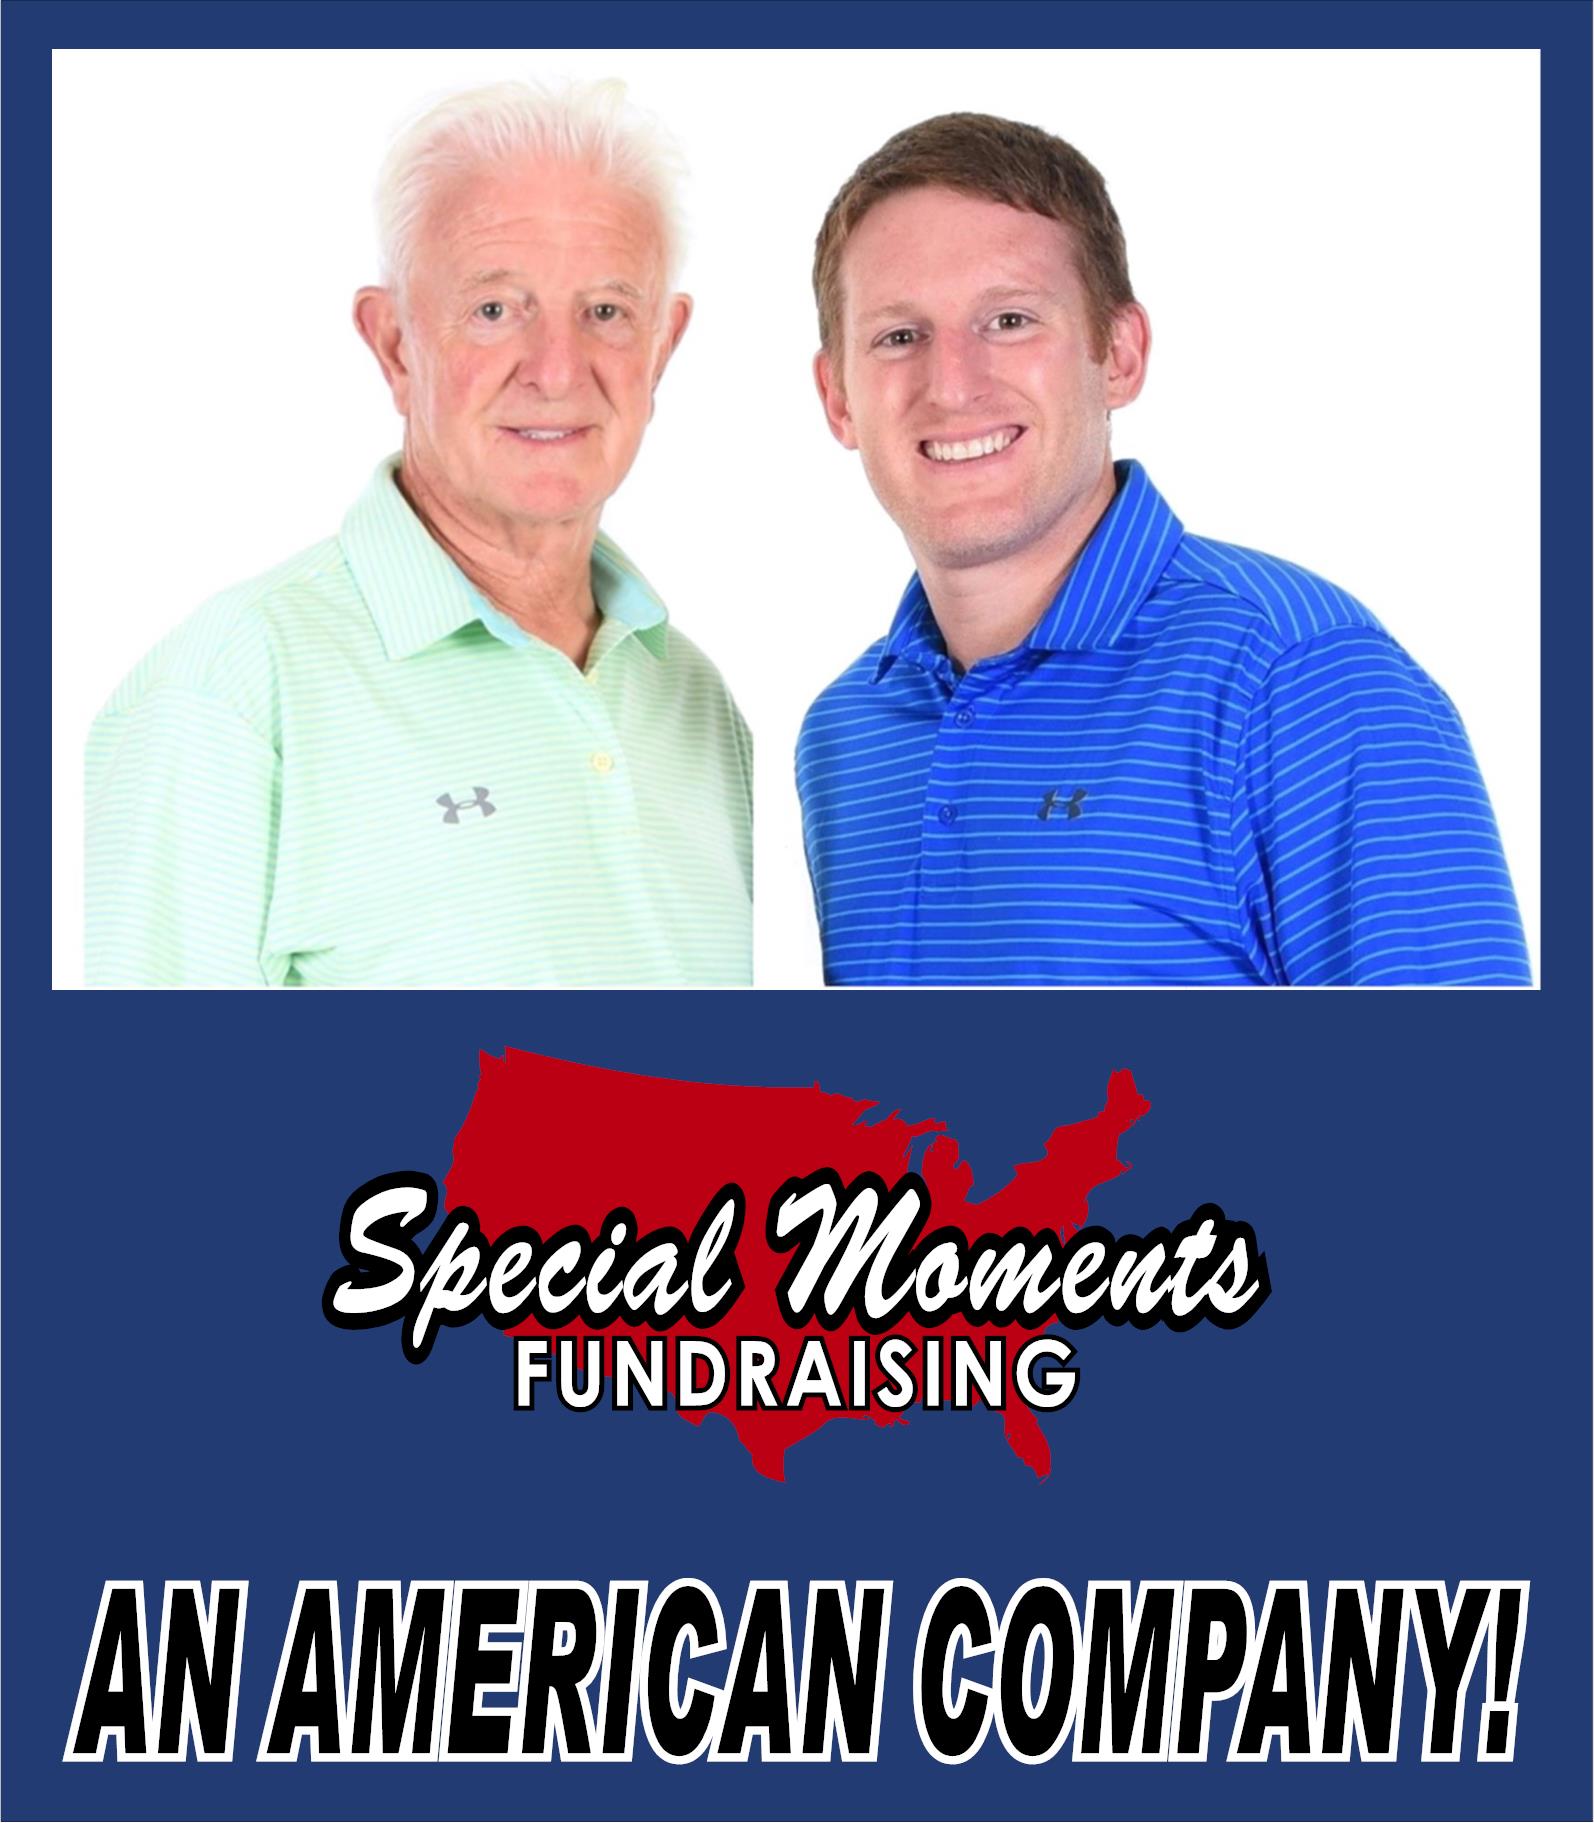 Special Moments Fundraising - An American Company